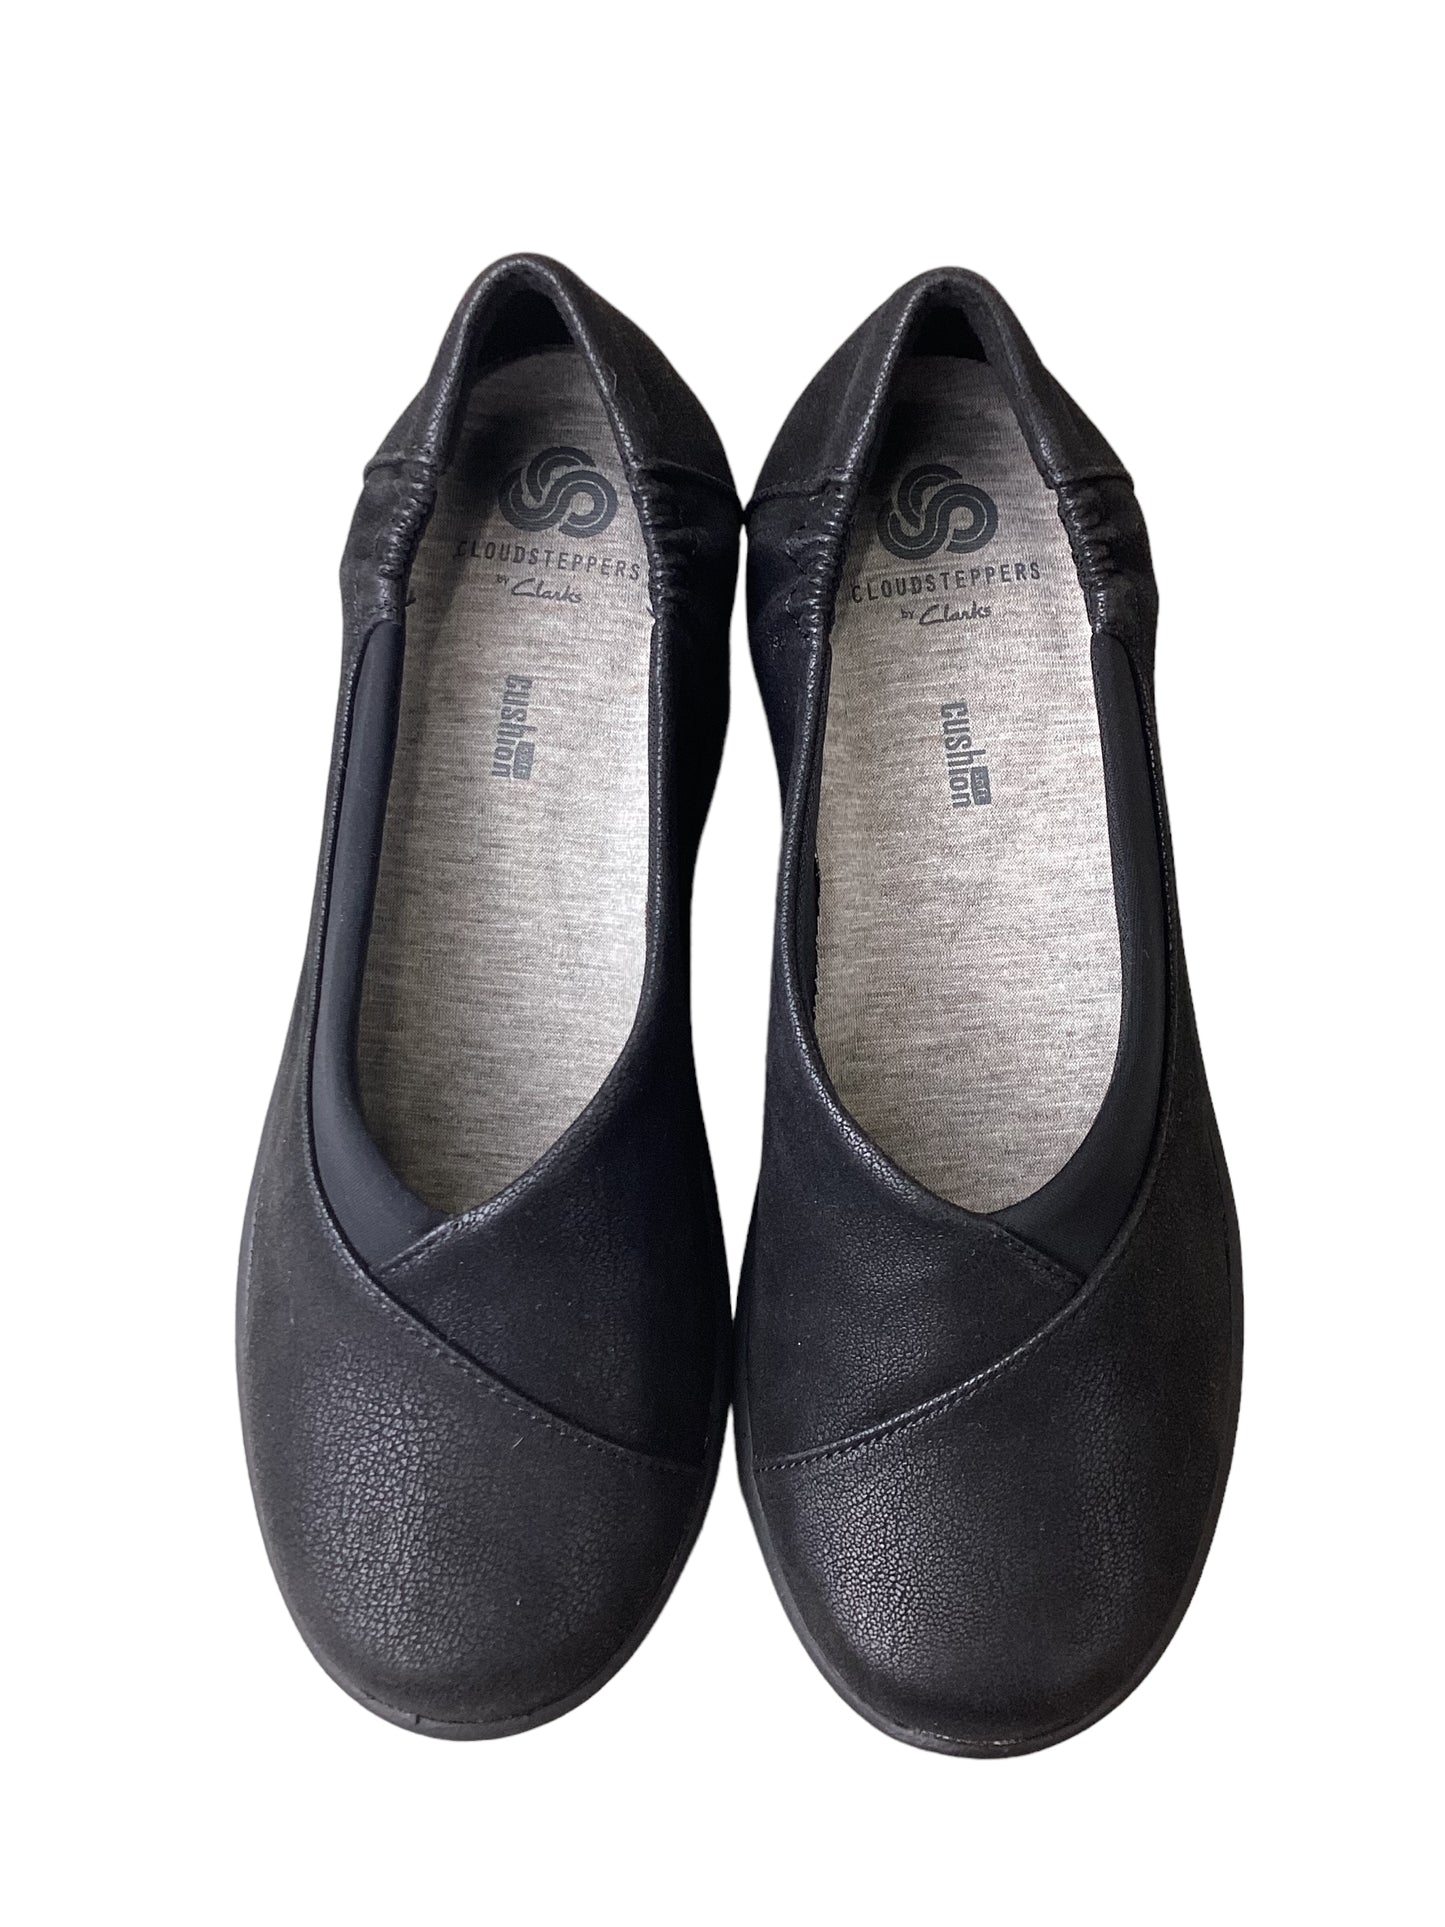 Shoes Flats Other By Clarks  Size: 6